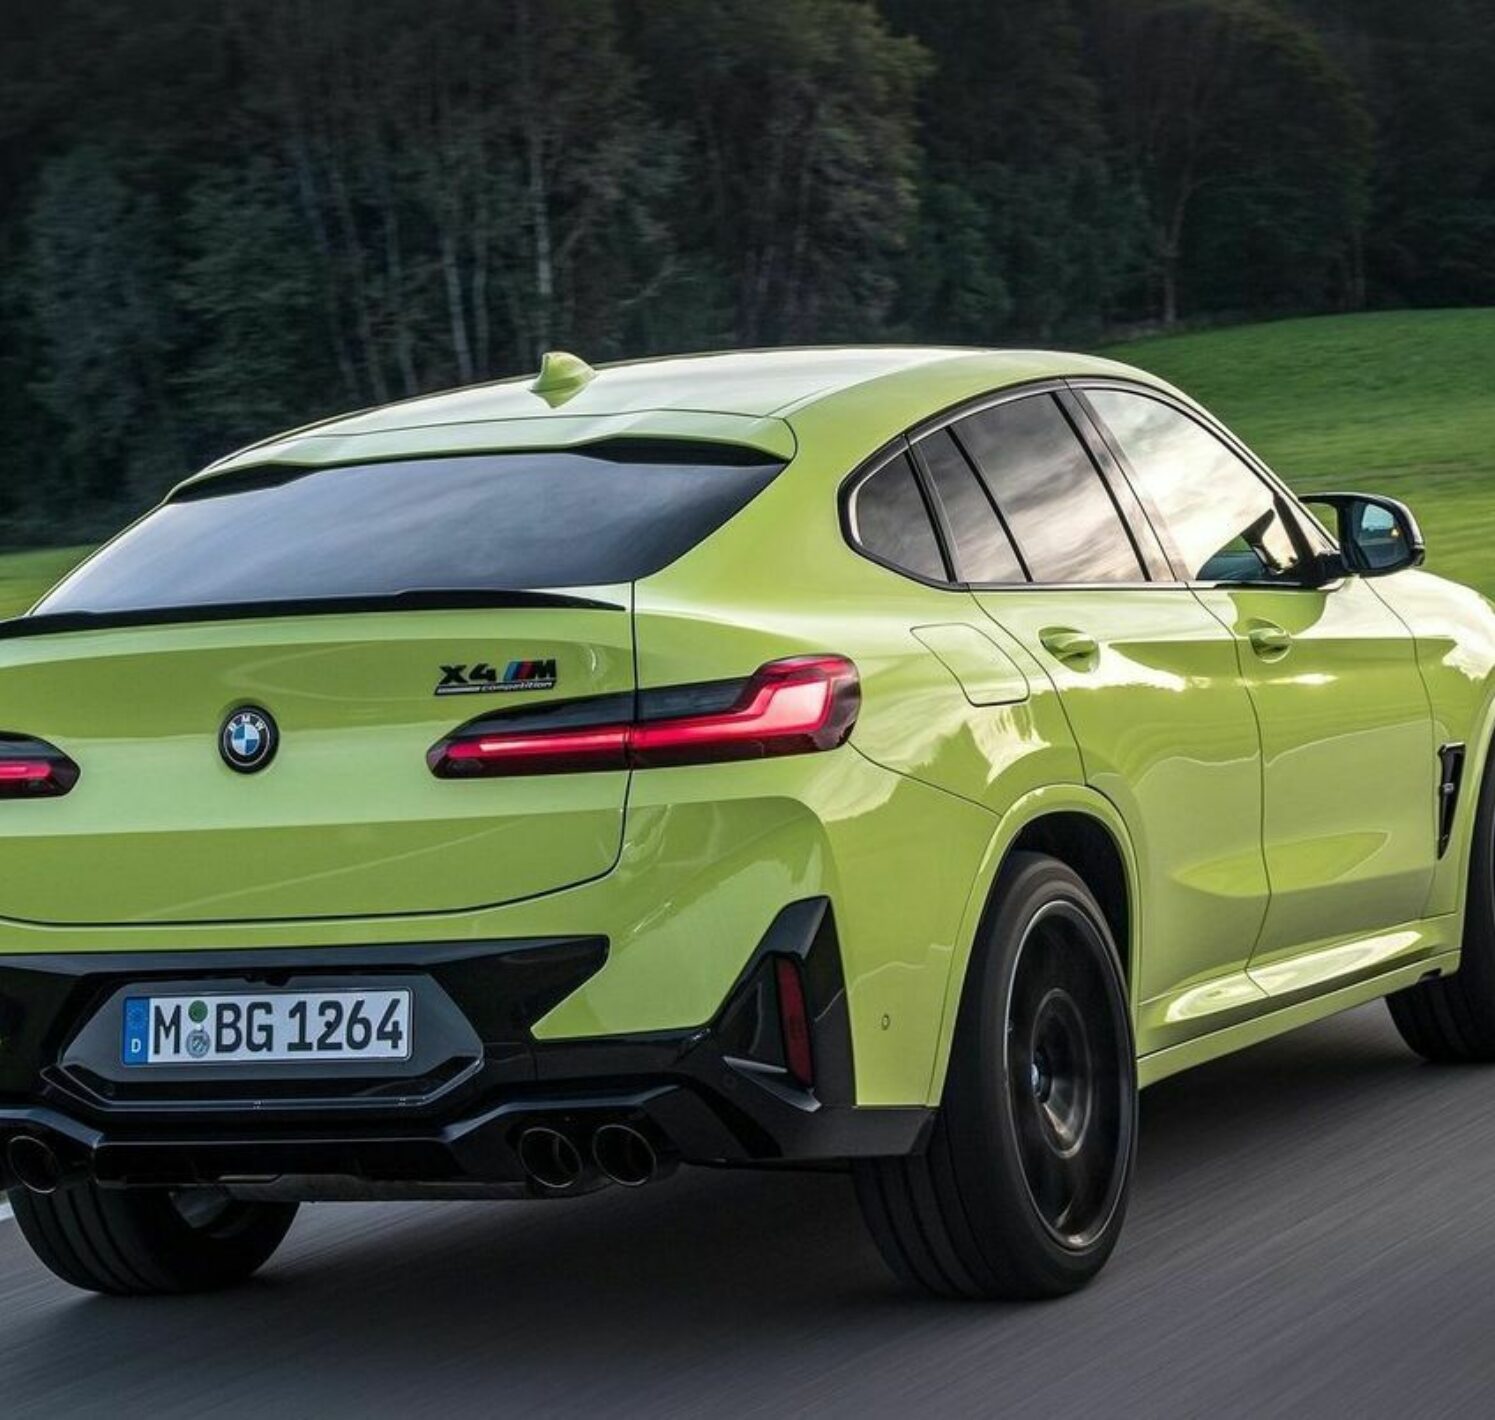 https://autofilter.sk/assets/images/x4-m/gallery/bmw-x4-m-competition-2022_05-galeria.jpg - obrazok